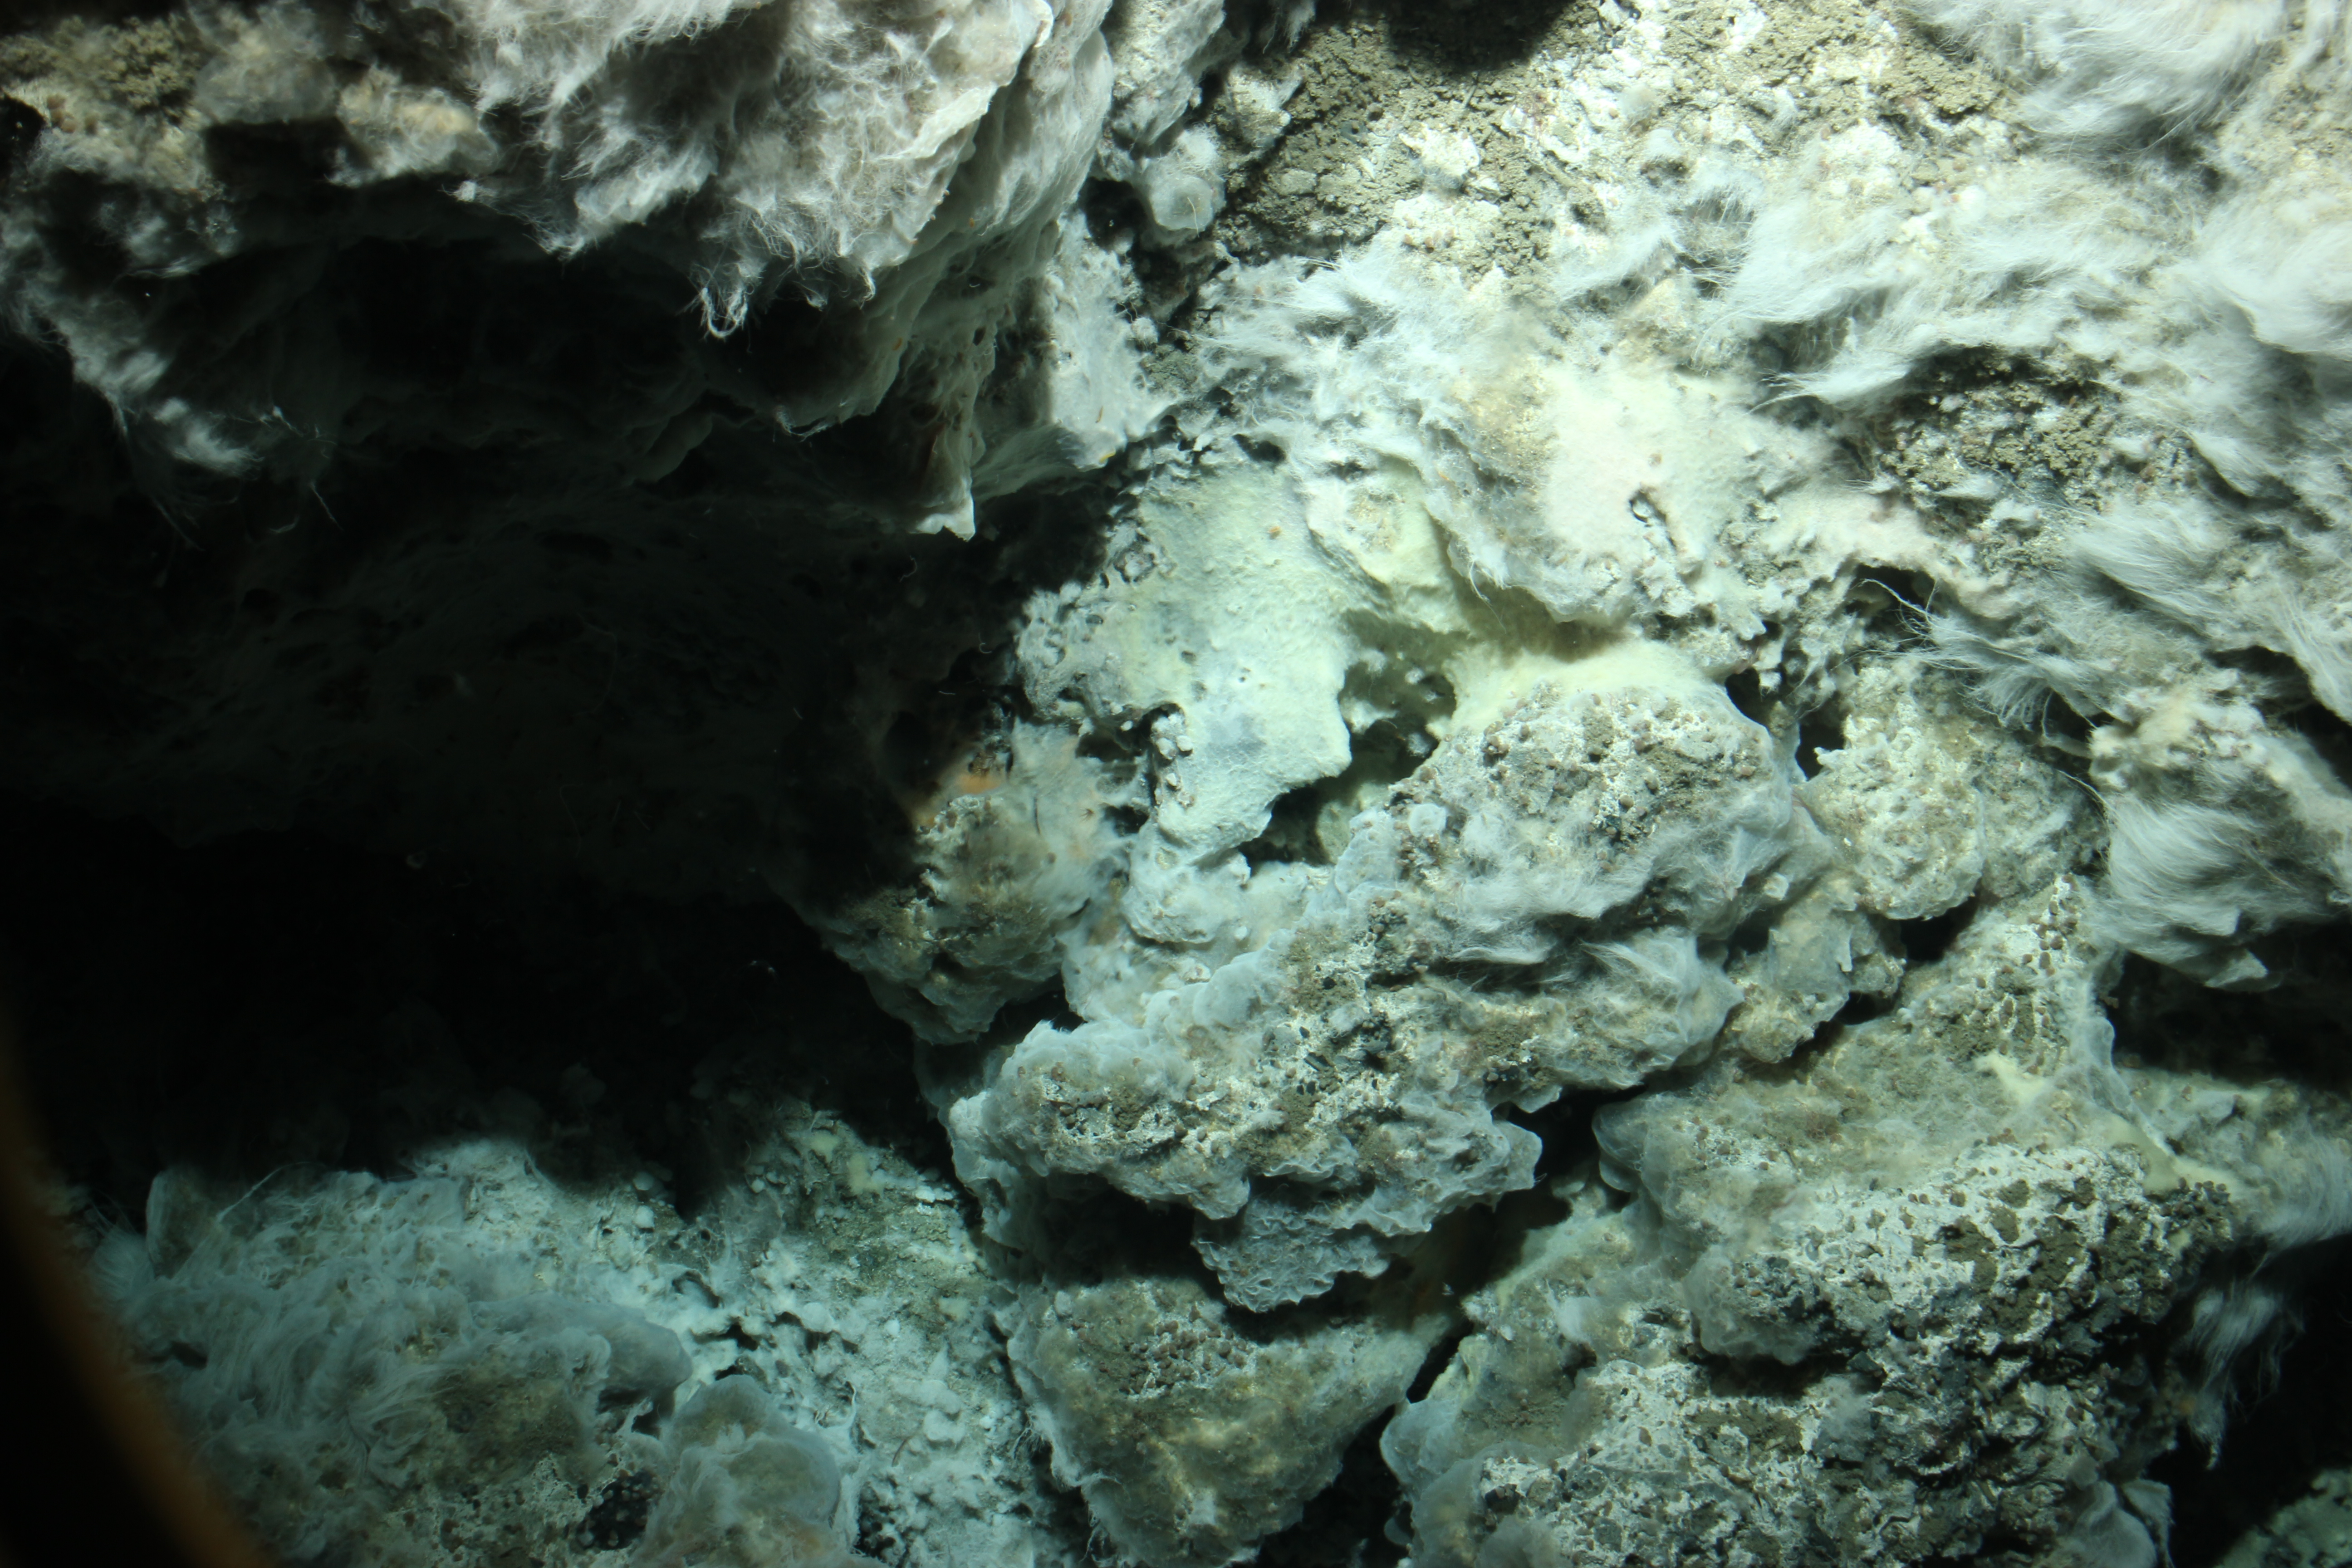 This photo taken under 3,000 feet of water shows the newly-found volcano's vent. Thread-like bacteria and minerals precipitating out of solution are visible. (Photo courtesy Stuart Nishenko)